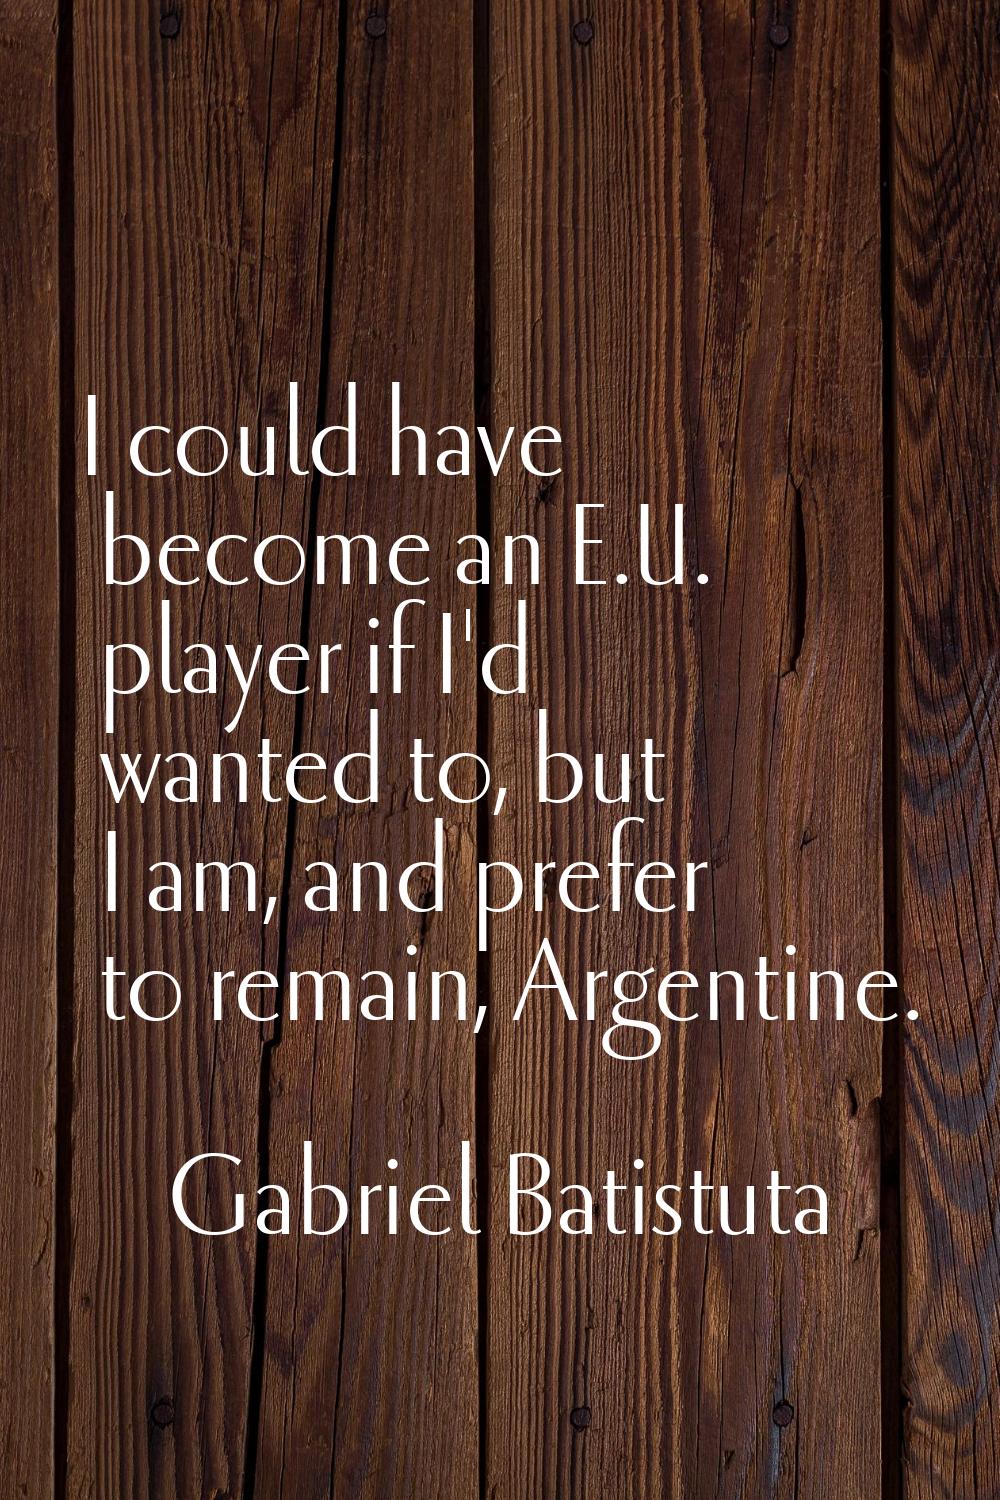 I could have become an E.U. player if I'd wanted to, but I am, and prefer to remain, Argentine.